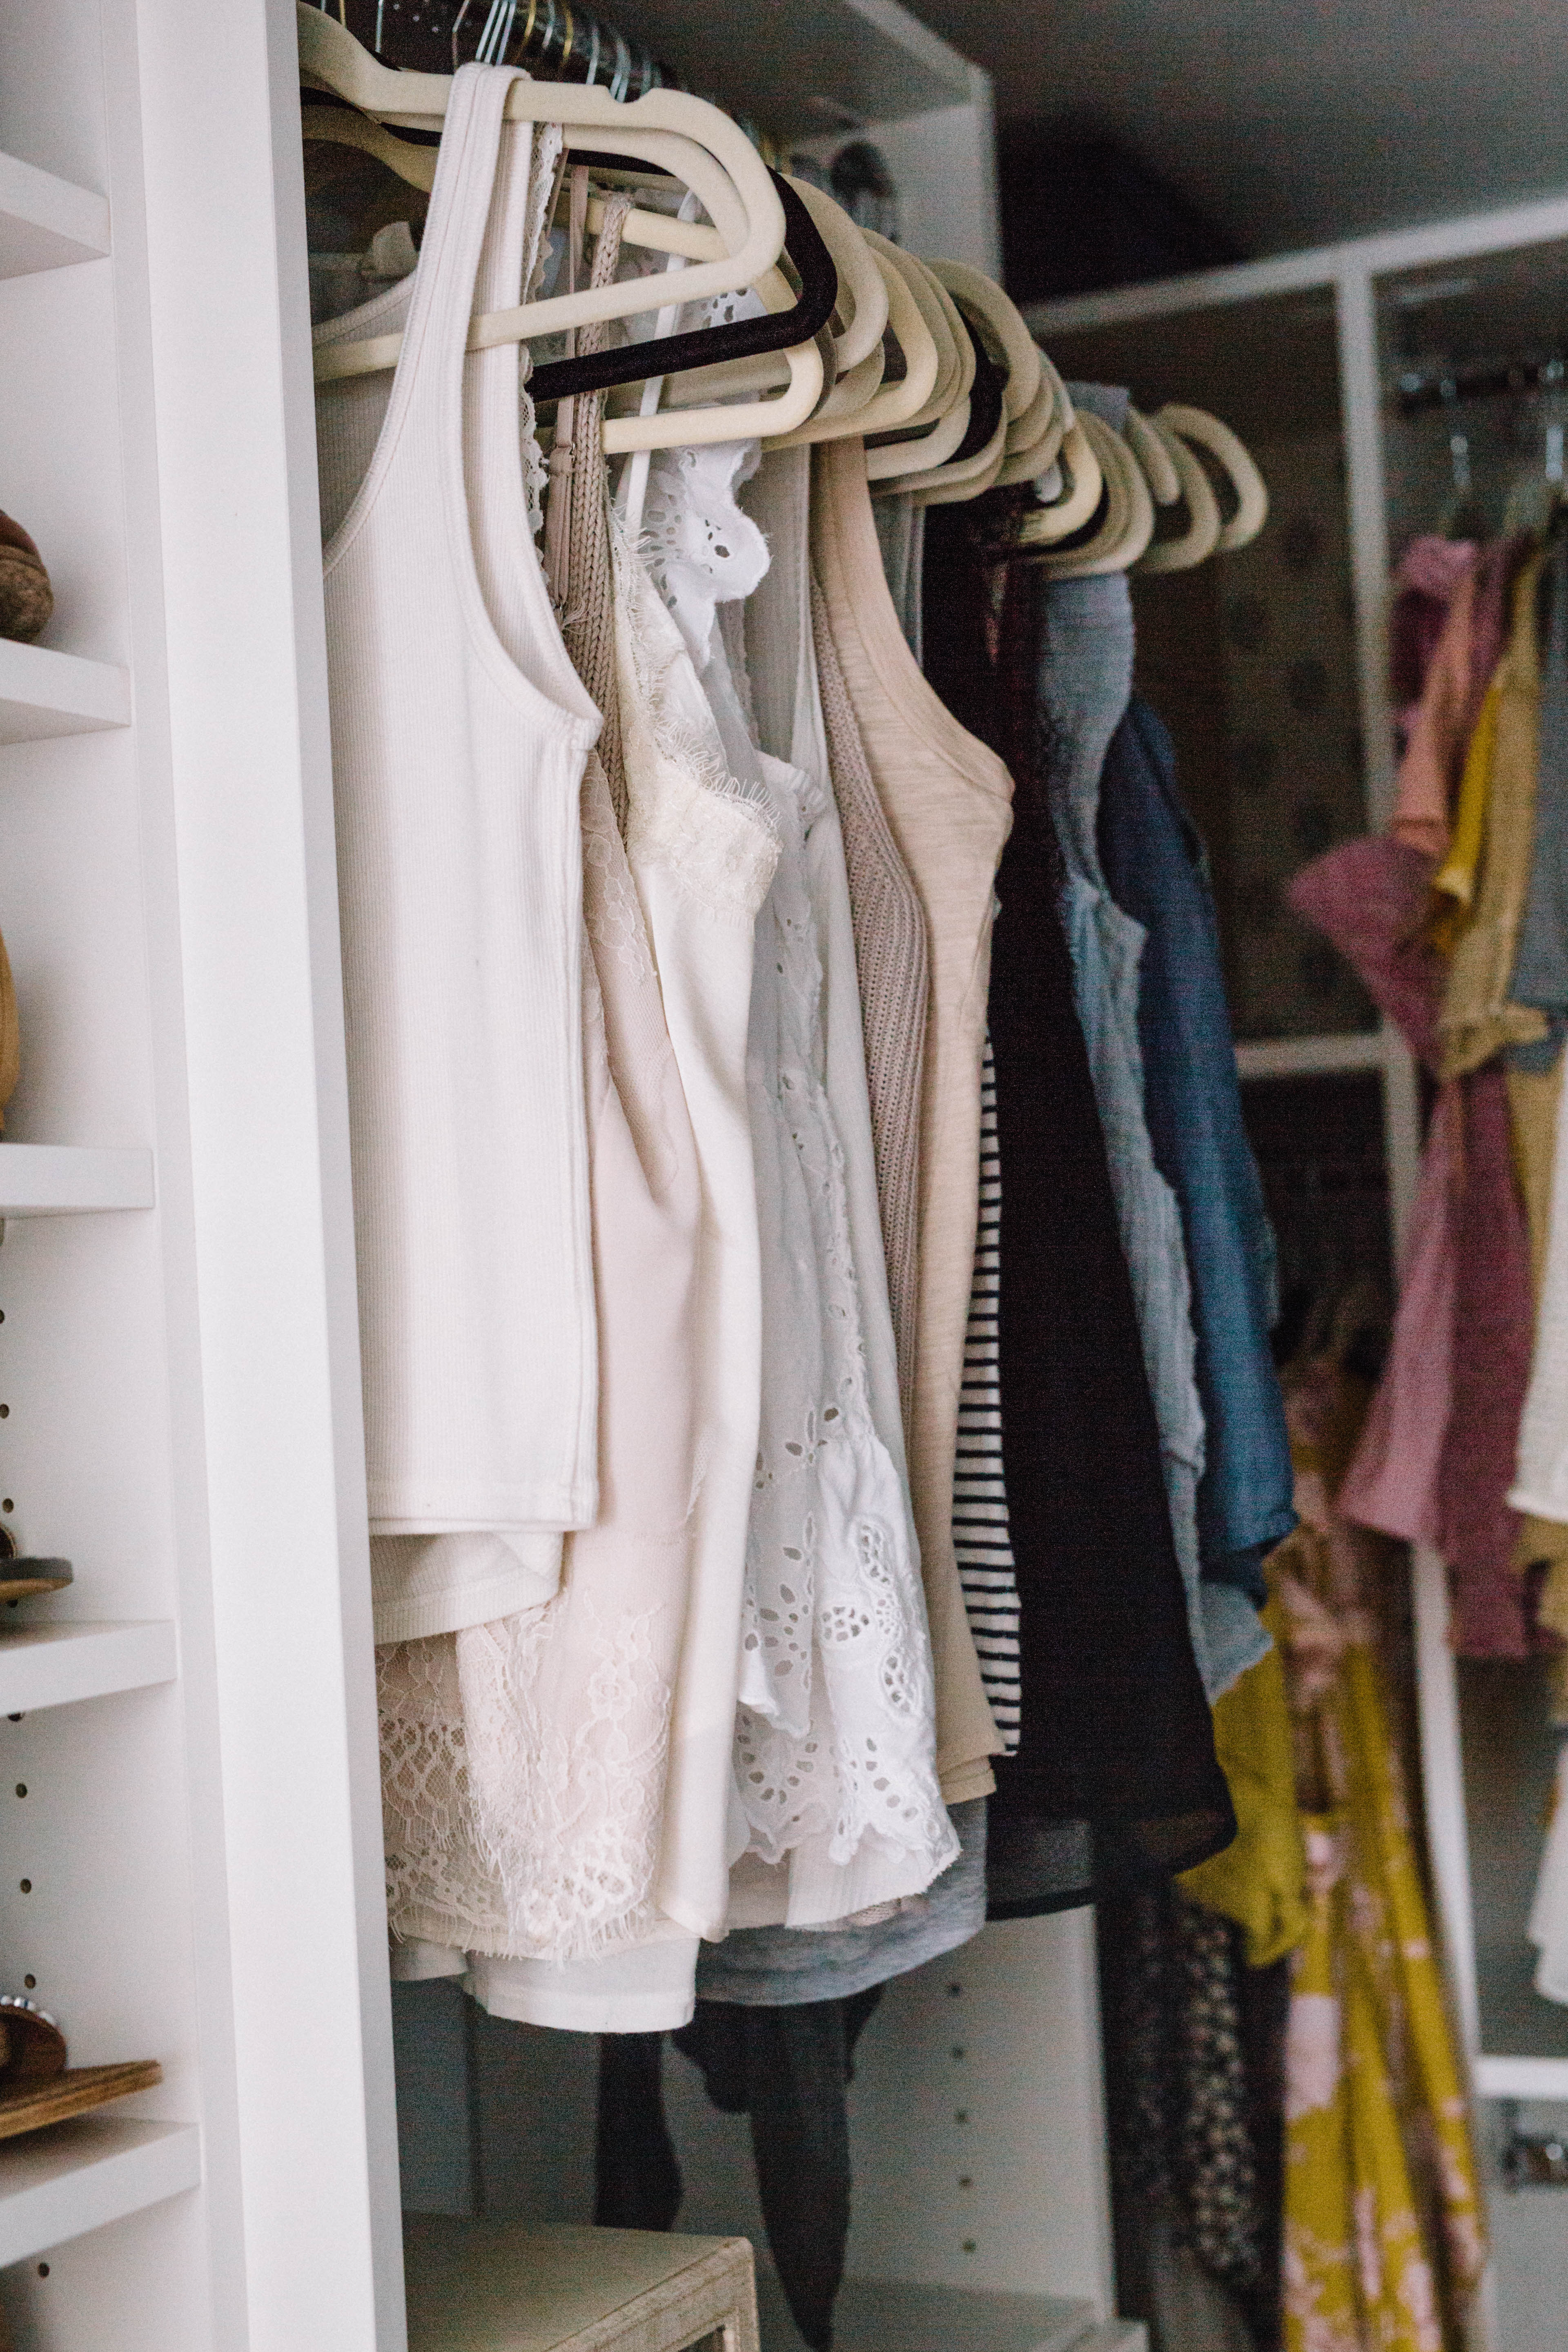 Our master walk-in closet makeover with built in drawers, a great area for shoes and more! 